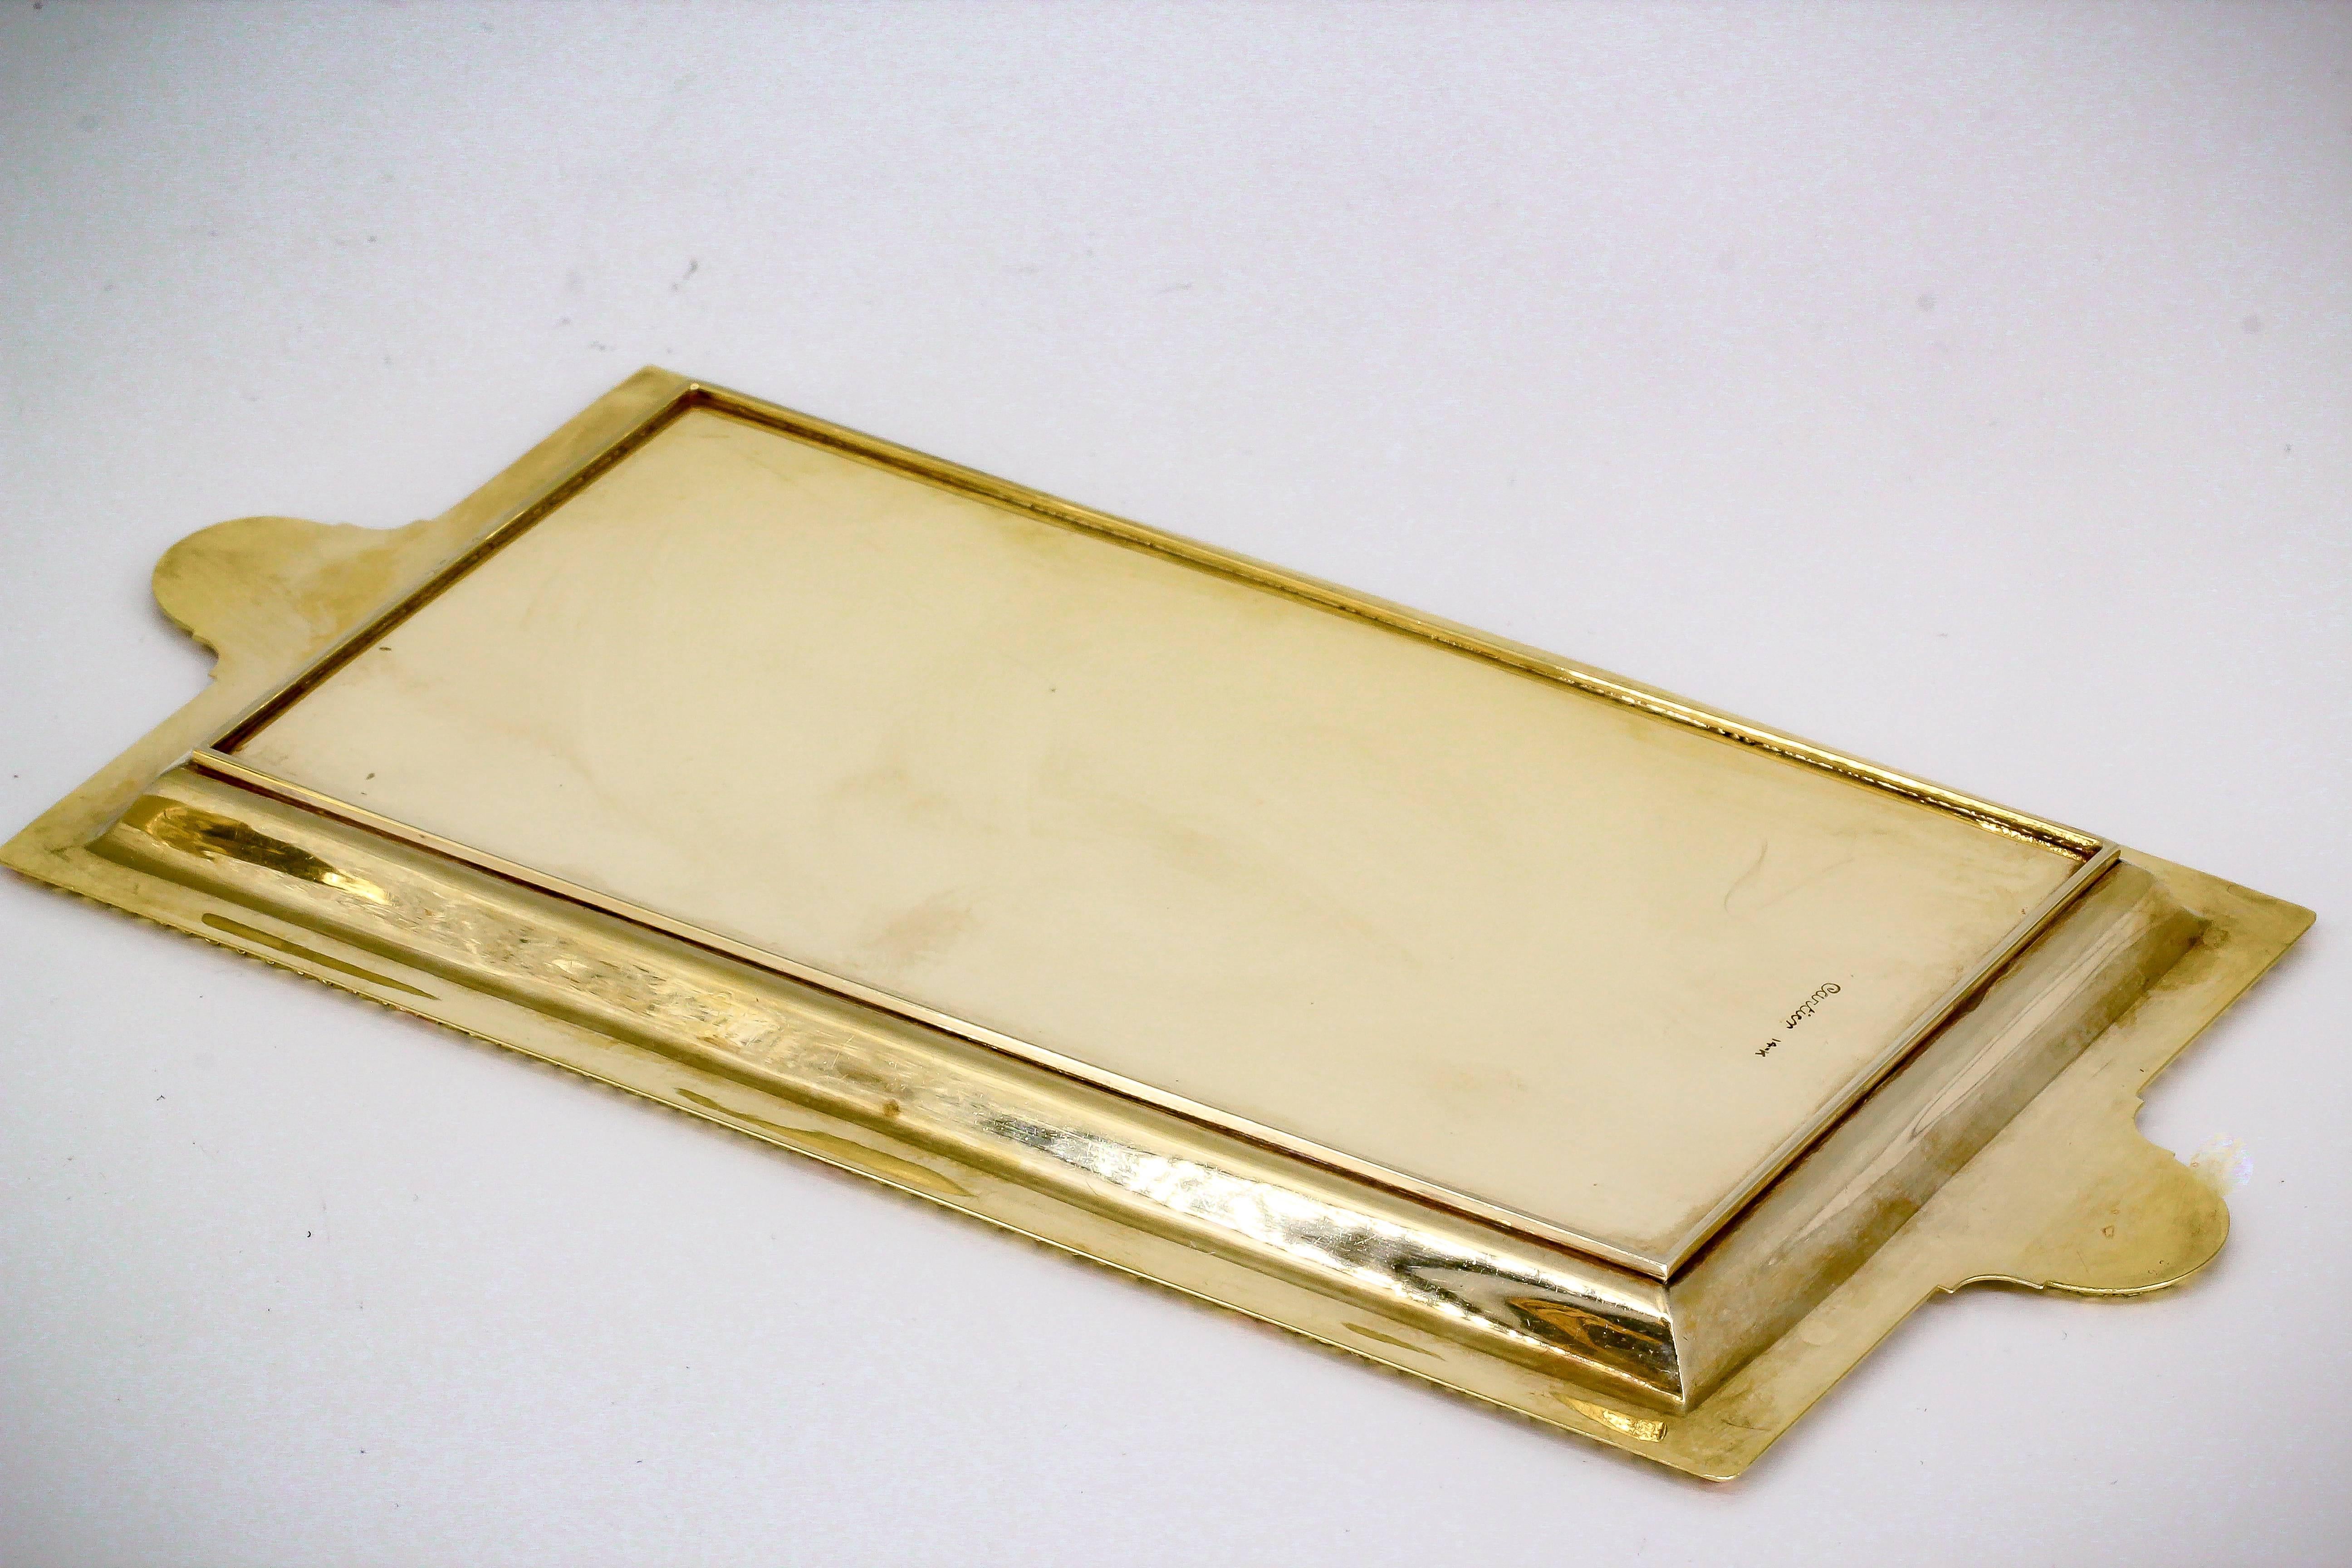 Rare and unusual  14K yellow gold rectangular tray by Cartier, circa 1930s. It features a very subtle ribbed design that feels textured to the touch, with intricate outer edge and thumb holds at sides. Beautifully made and an outstanding display